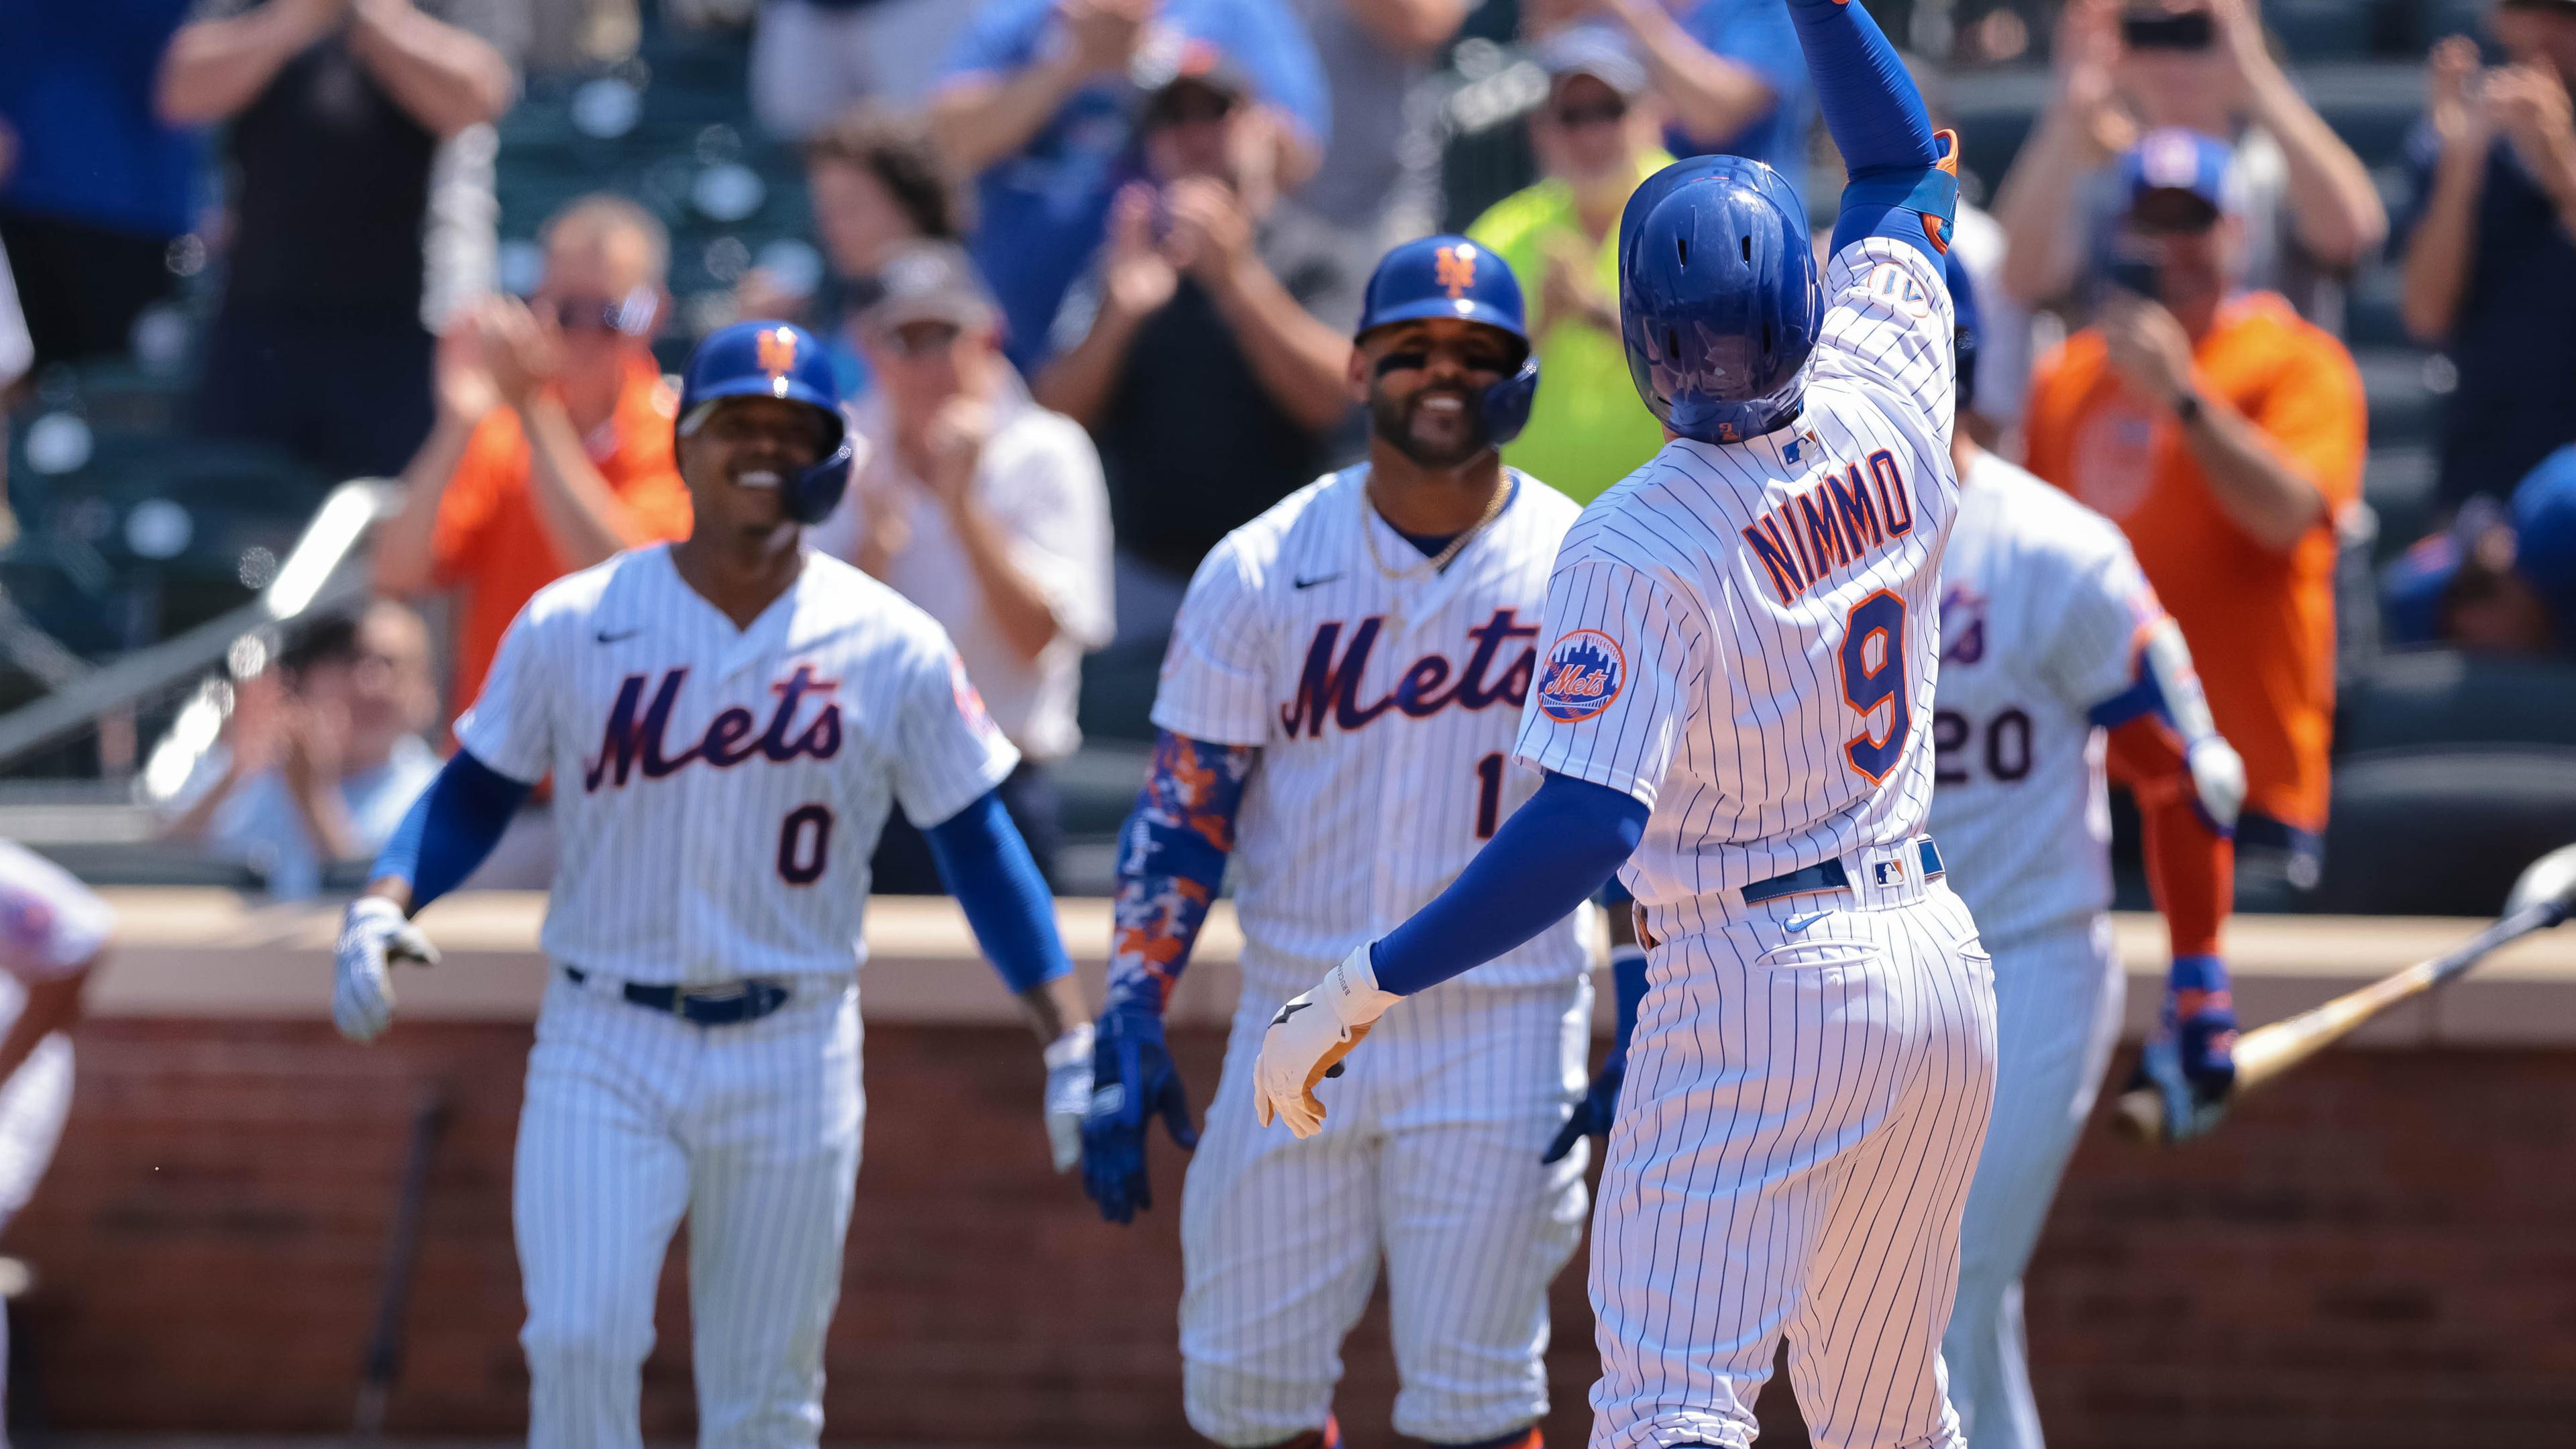 Aug 12, 2021; New York City, NY, USA; New York Mets center fielder Brandon Nimmo (9) celebrates with teammates after hitting a three run home run during the second inning against the Washington Nationals at Citi Field. / Vincent Carchietta-USA TODAY Sports